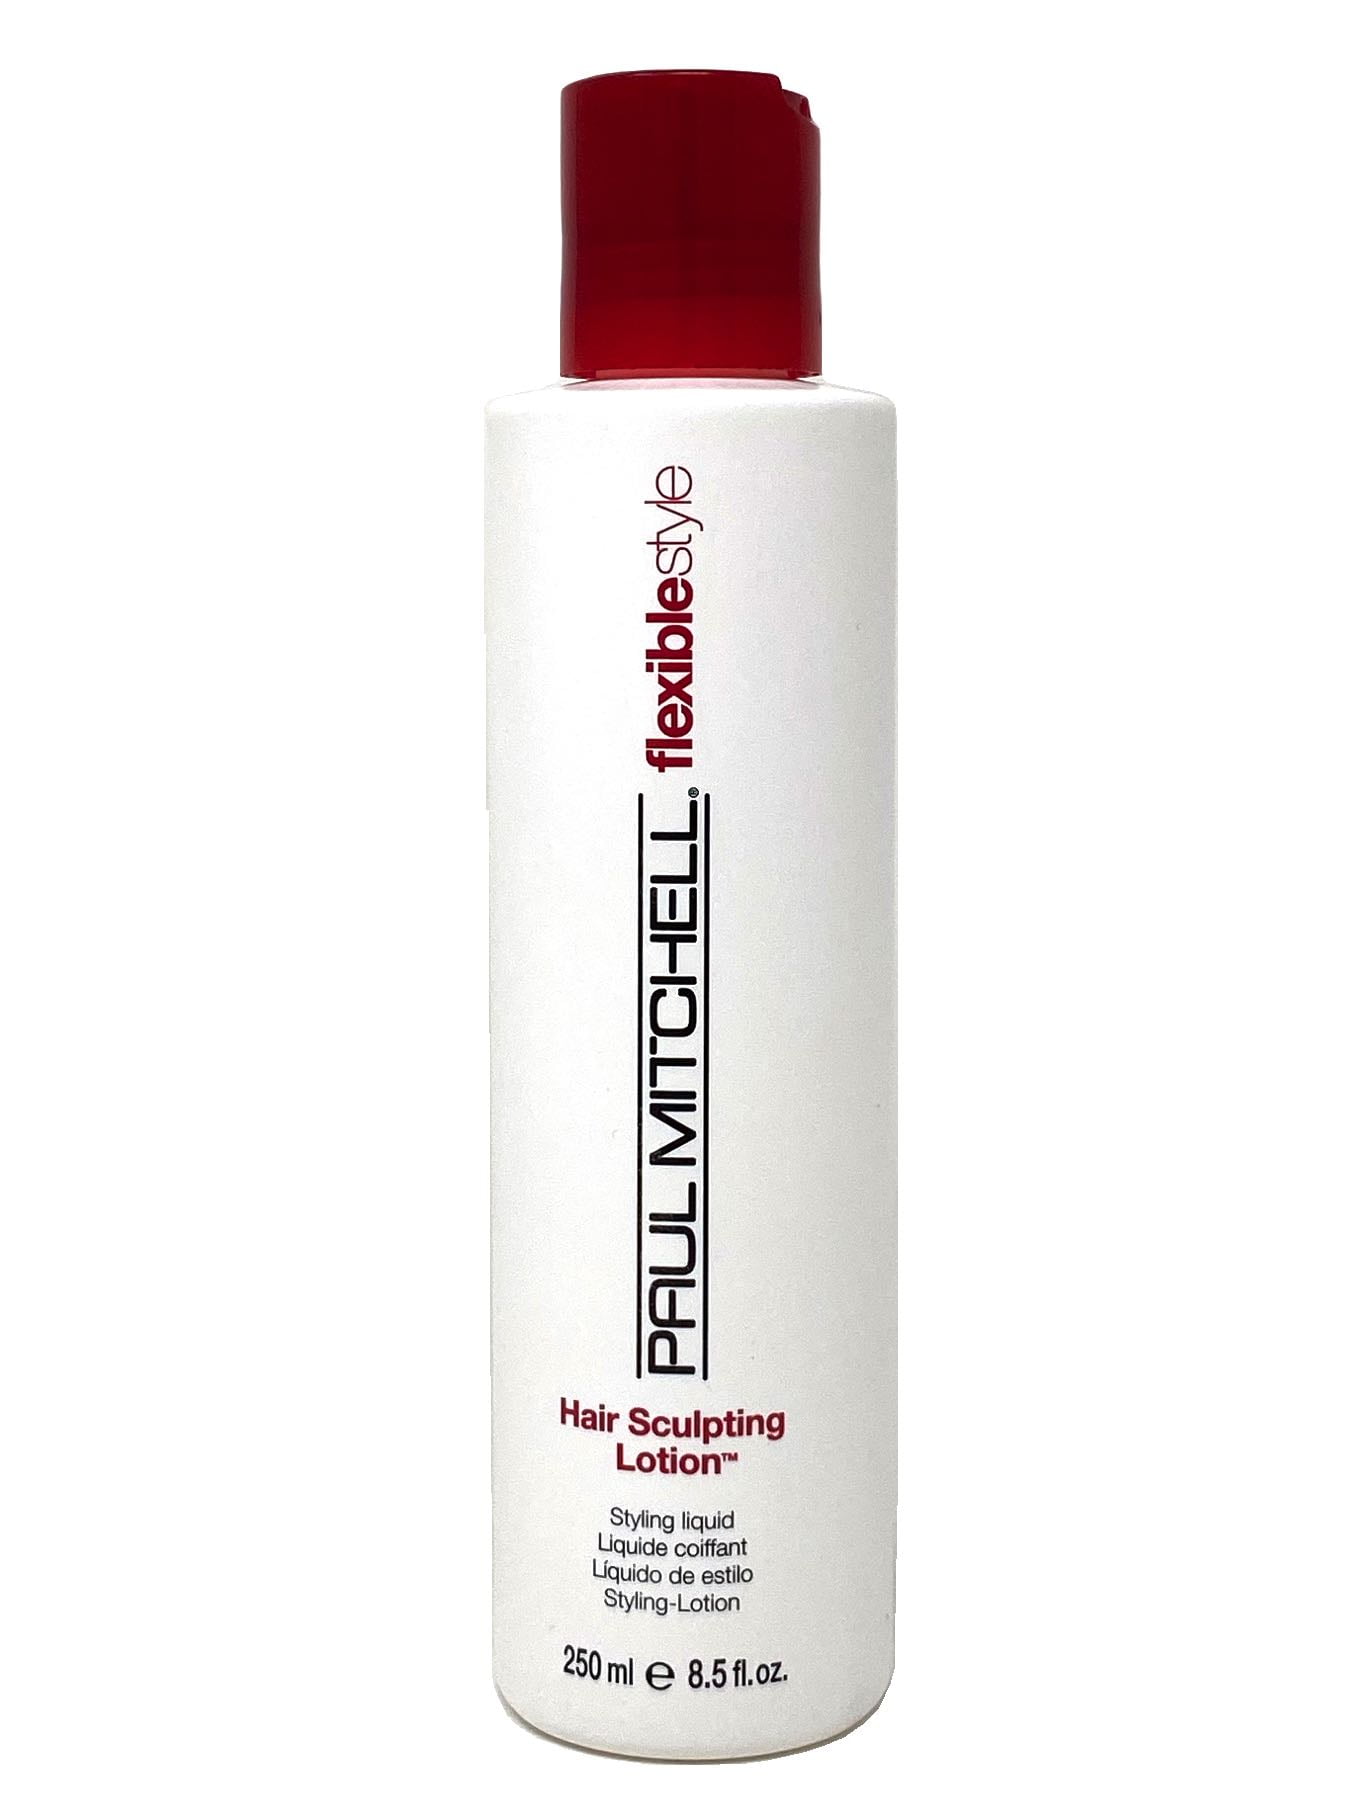 paul mitchell products